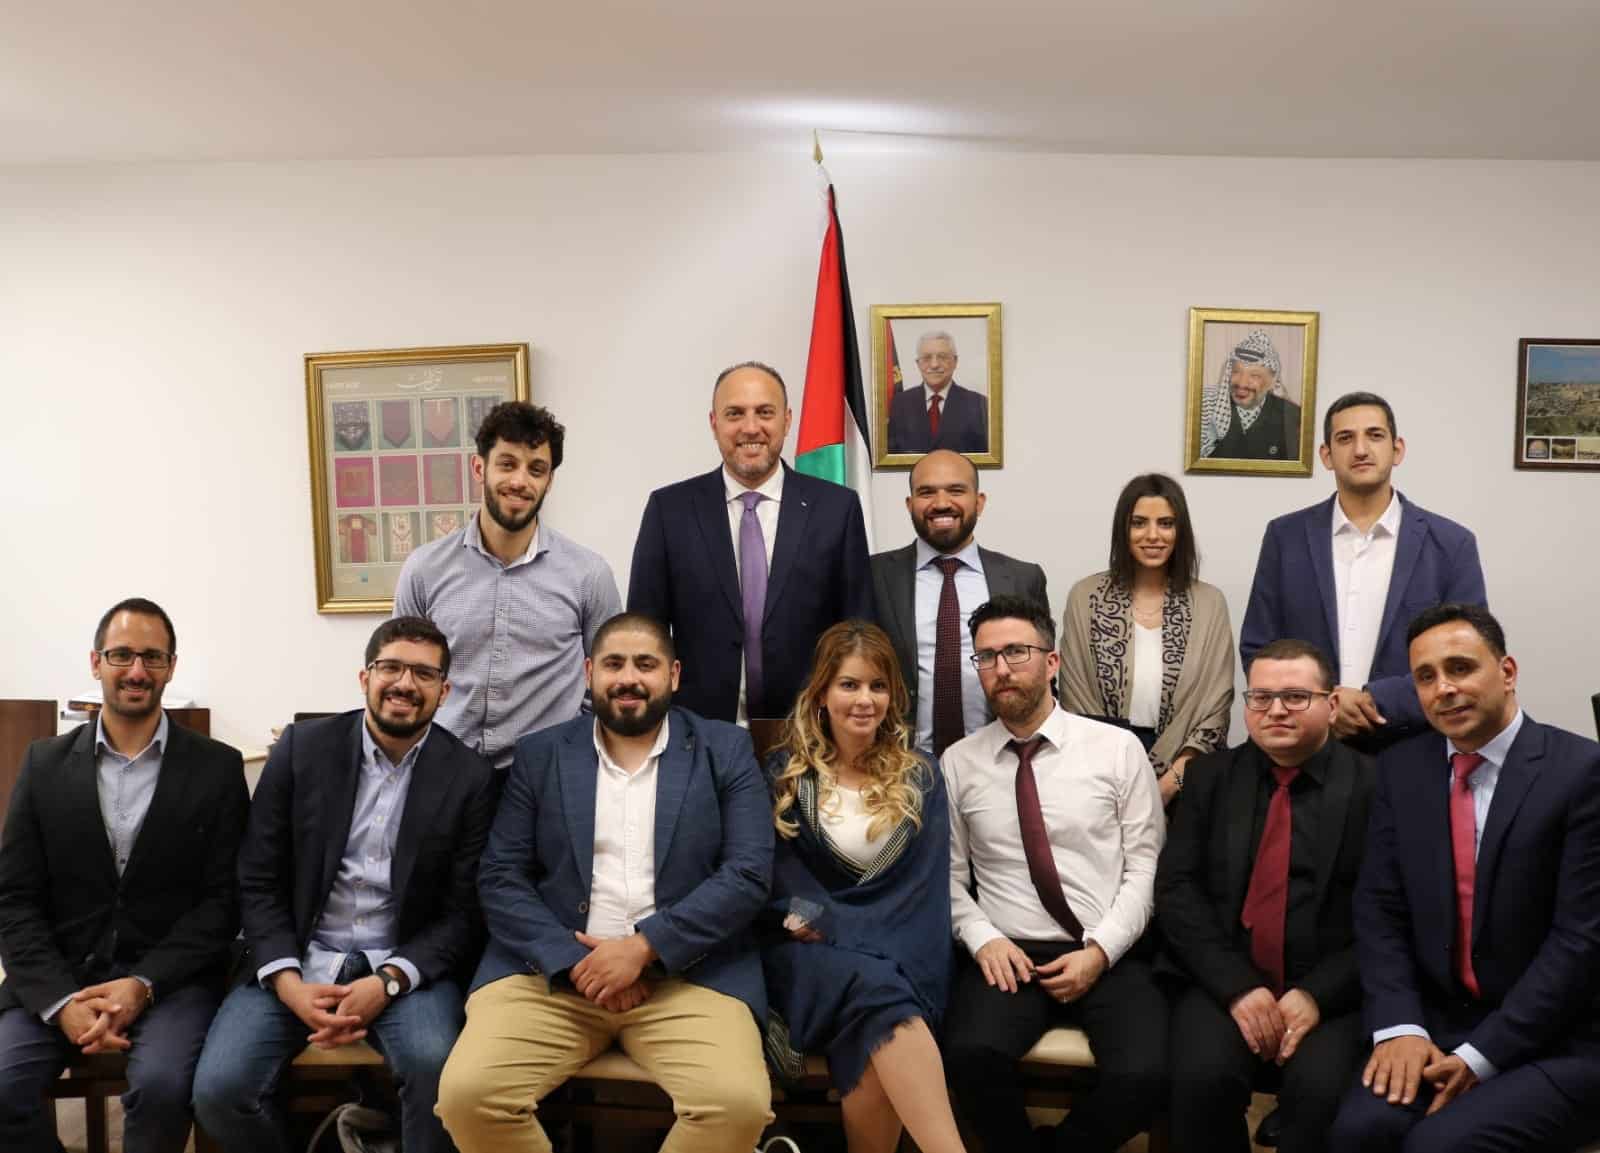 A group of Palestinian entrepreneurs visited the UK as part of their participation in an event to showcase Palestinian entrepreneurship. The event was organised with support from the Arab-British Chamber of Commerce (ABCC). The goal of the visit was to highlight the many talents in the Palestinian market in fintech, services and ICT sectors. At the Palestinian Mission in London, the group were received by H. E. Dr Husam Zomlot who praised their innovation as a lever for the Palestinian economy. Dr Zomlot argued that tech startups are one way the Palestinians can overcome the physical barriers placed by the Israeli occupation against the development of the Palestinian economy. The group is part of MENA Catalyst Foundation, a regional incubator which seeks to develop the business links between entrepreneurs in Palestine and the region and potential cooperation opportunities in Europe and North America.